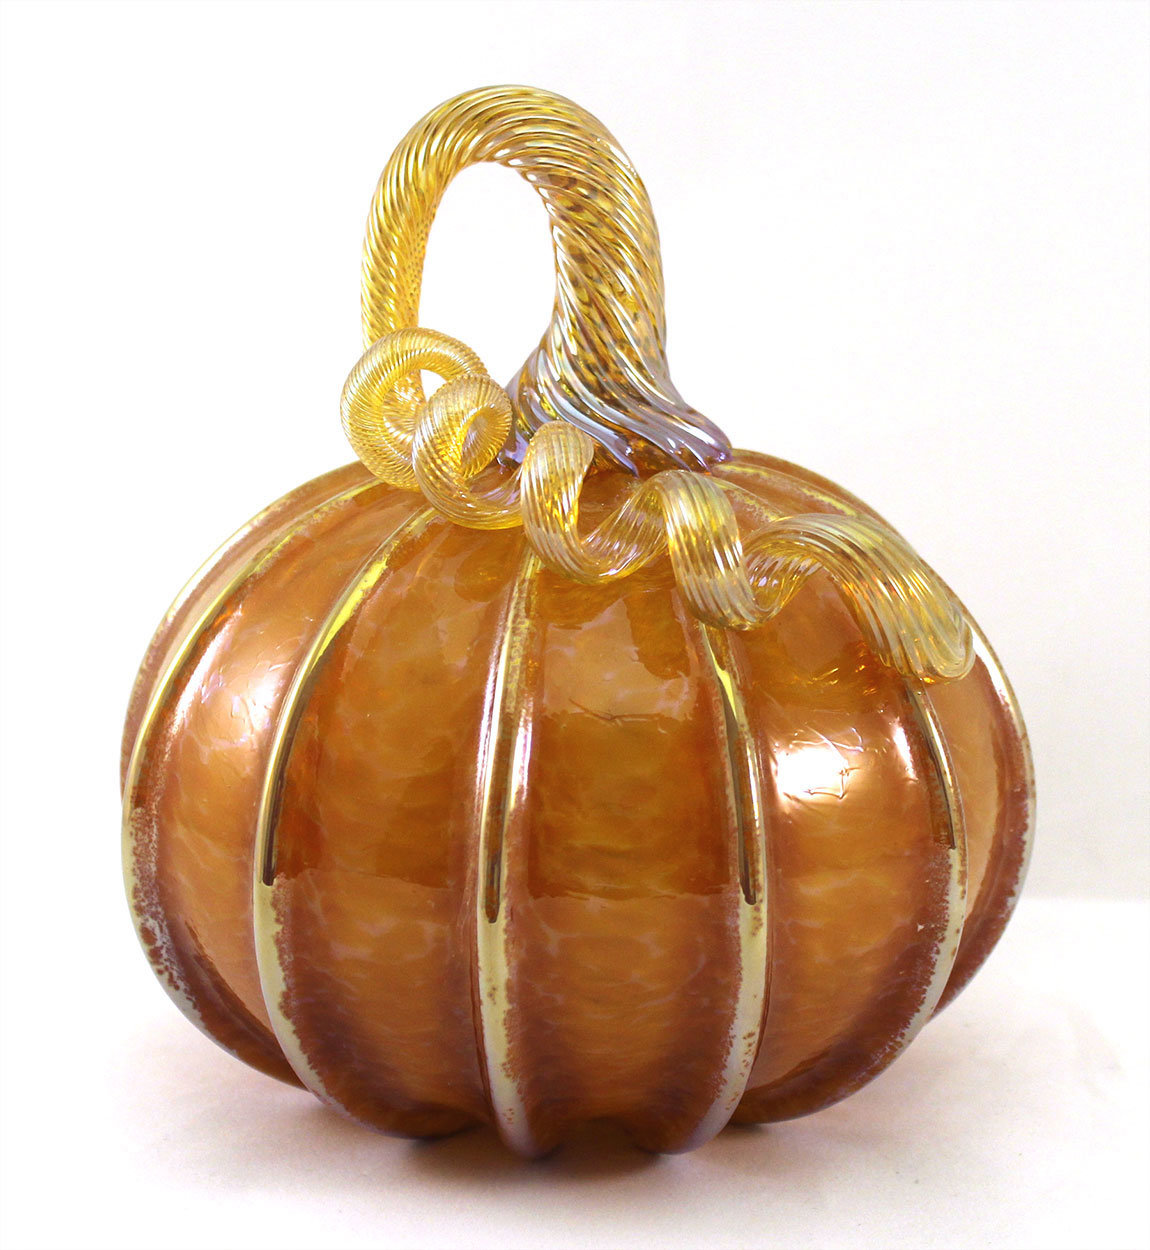 Small Topaz Pumpkin with Gold Stripes by Ken Hanson and Ingrid Hanson